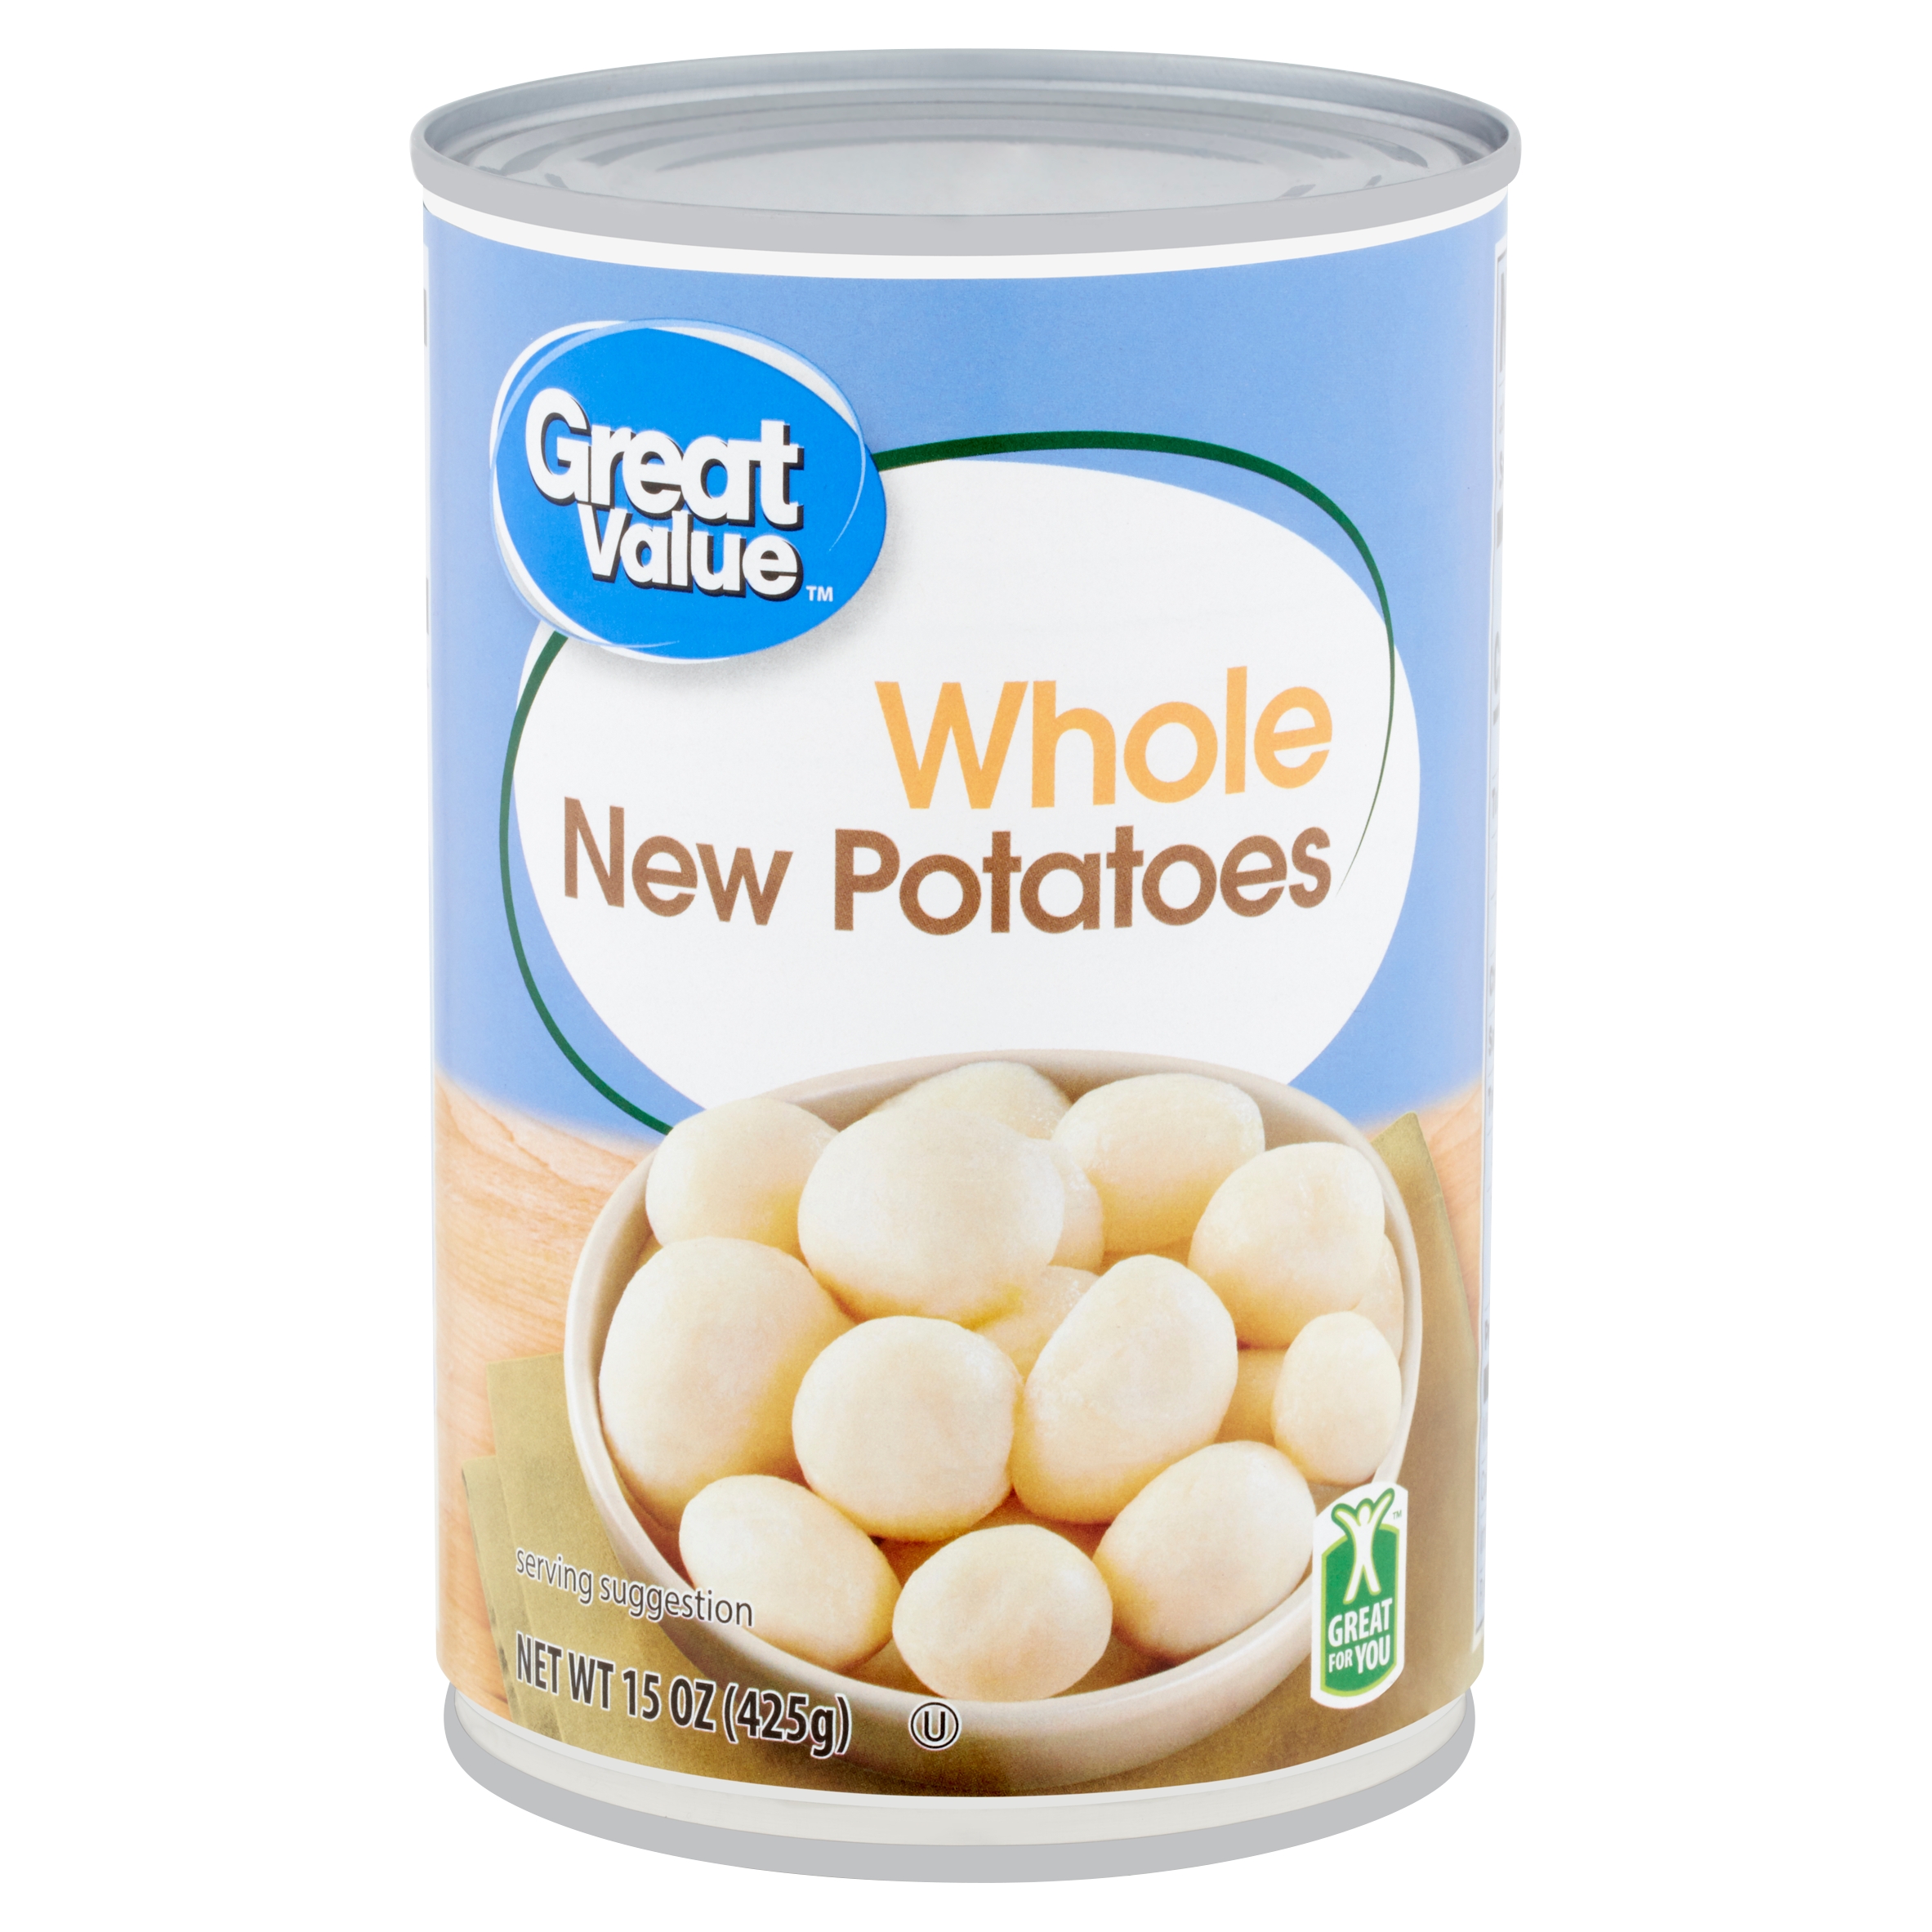 (6 Pack) Great Value Whole New Potatoes, 15 Oz Image